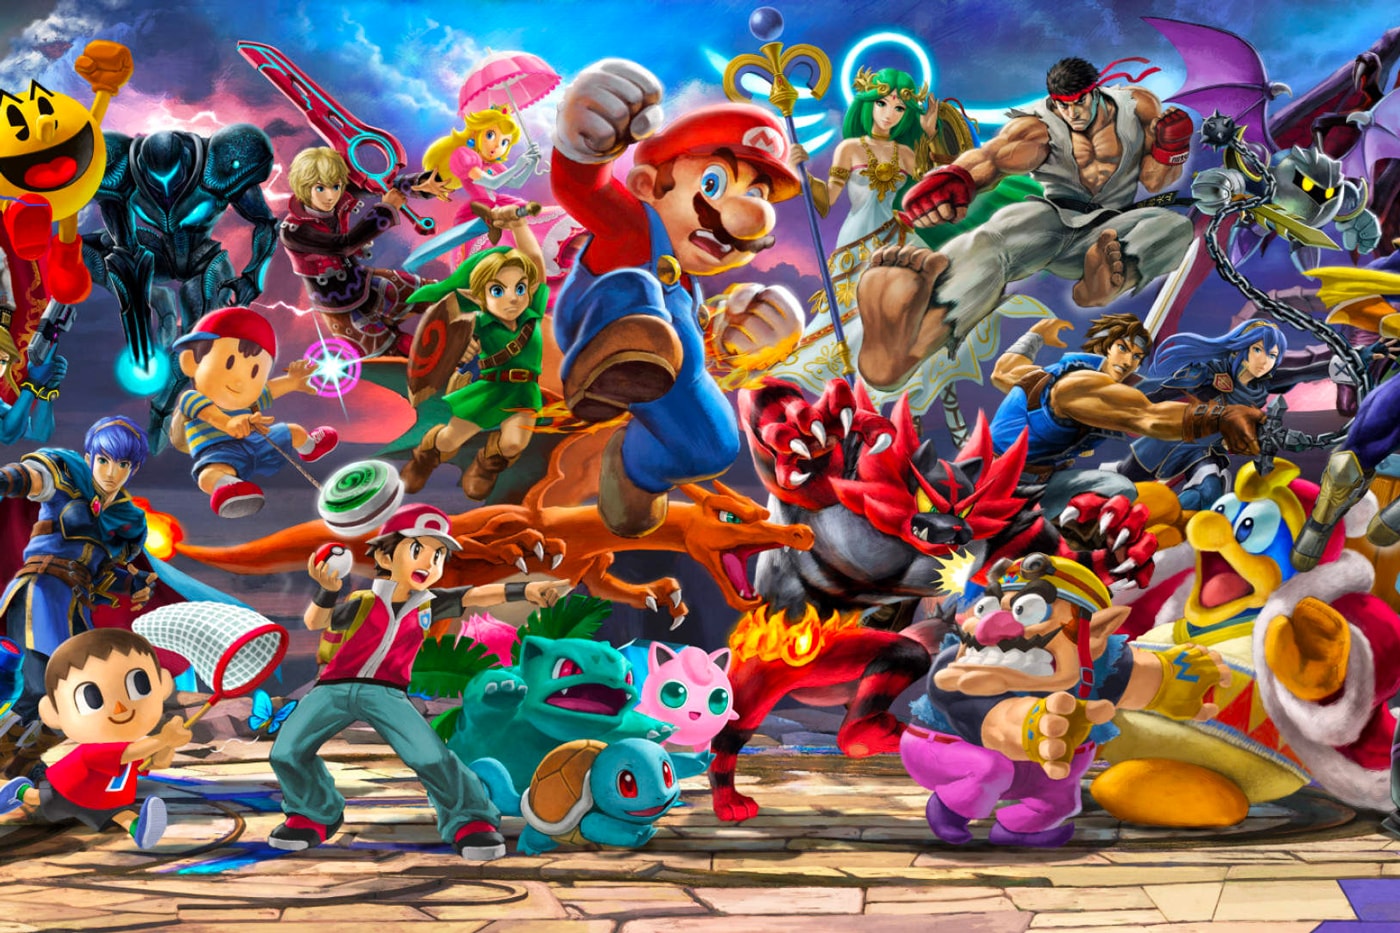 Super Smash Bros Ultimate Online Open lets players compete for